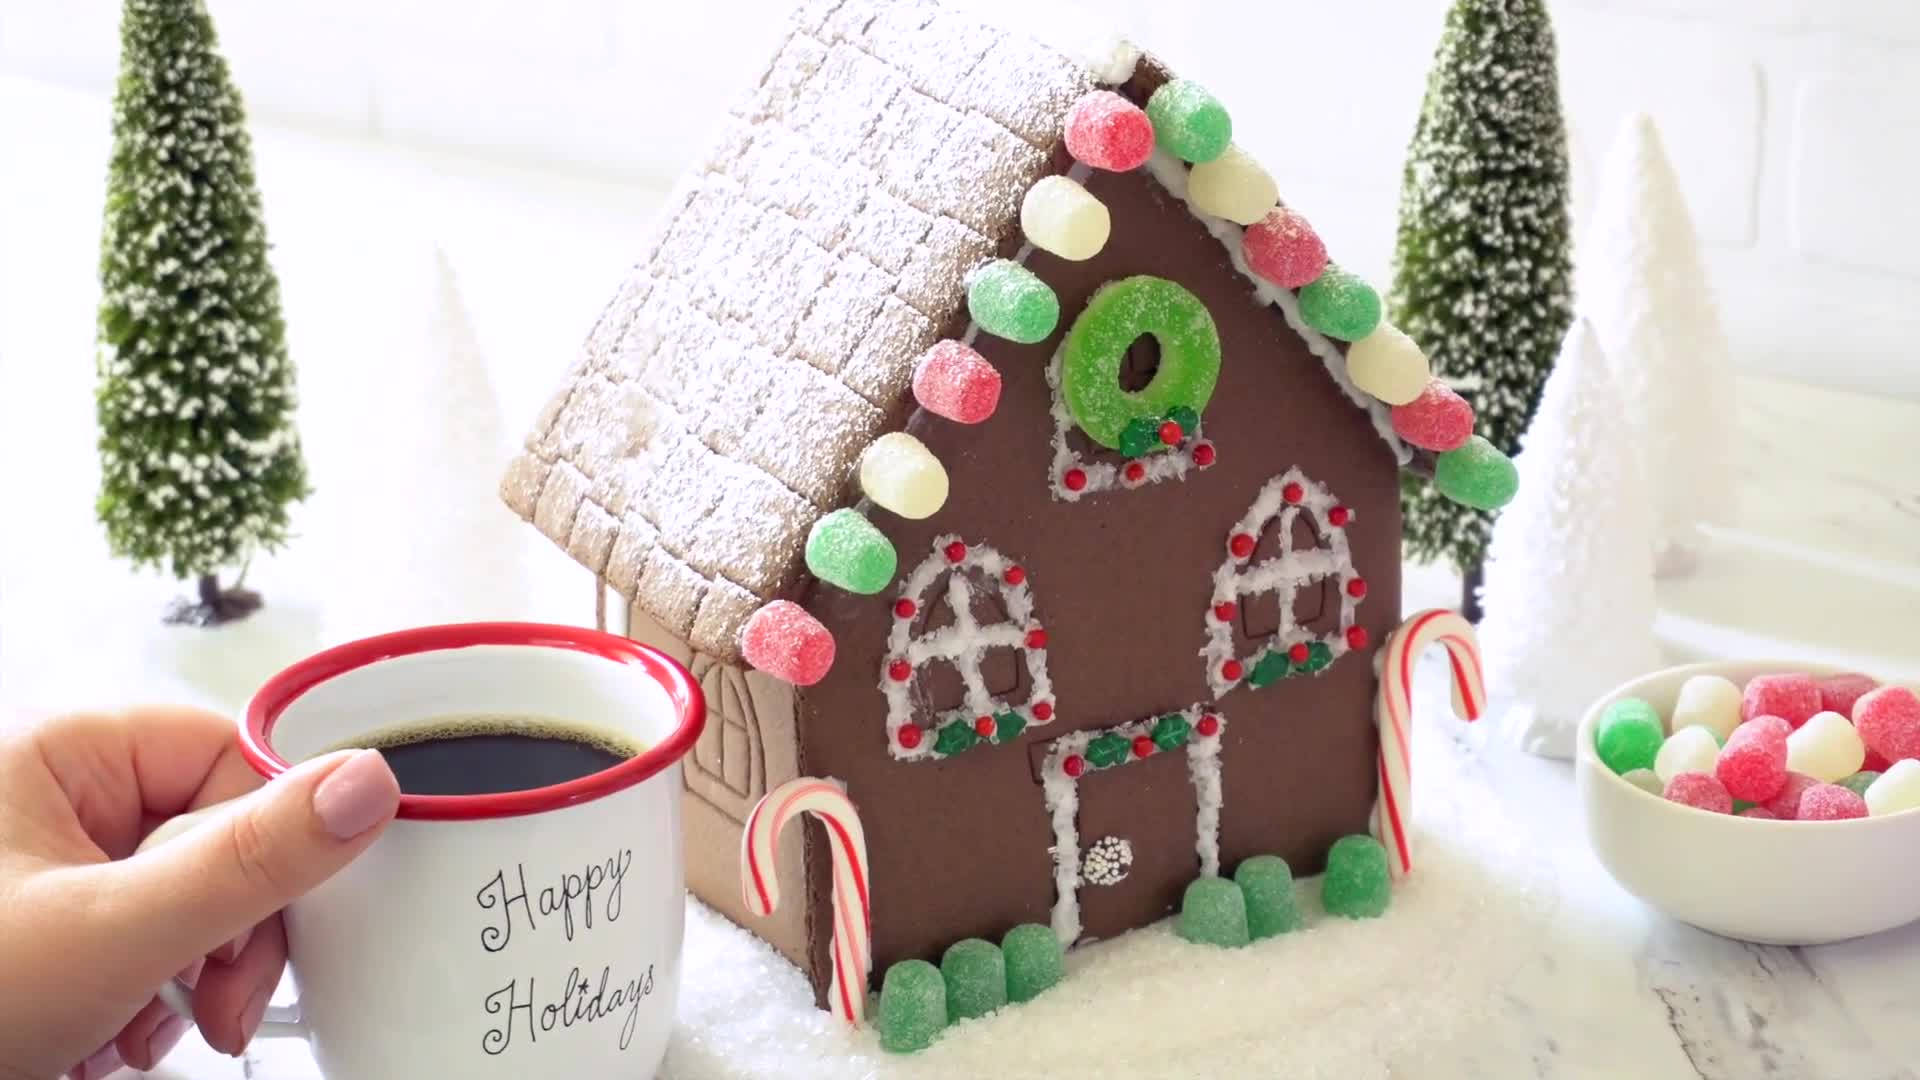 Sugary Gingerbread House Wallpaper